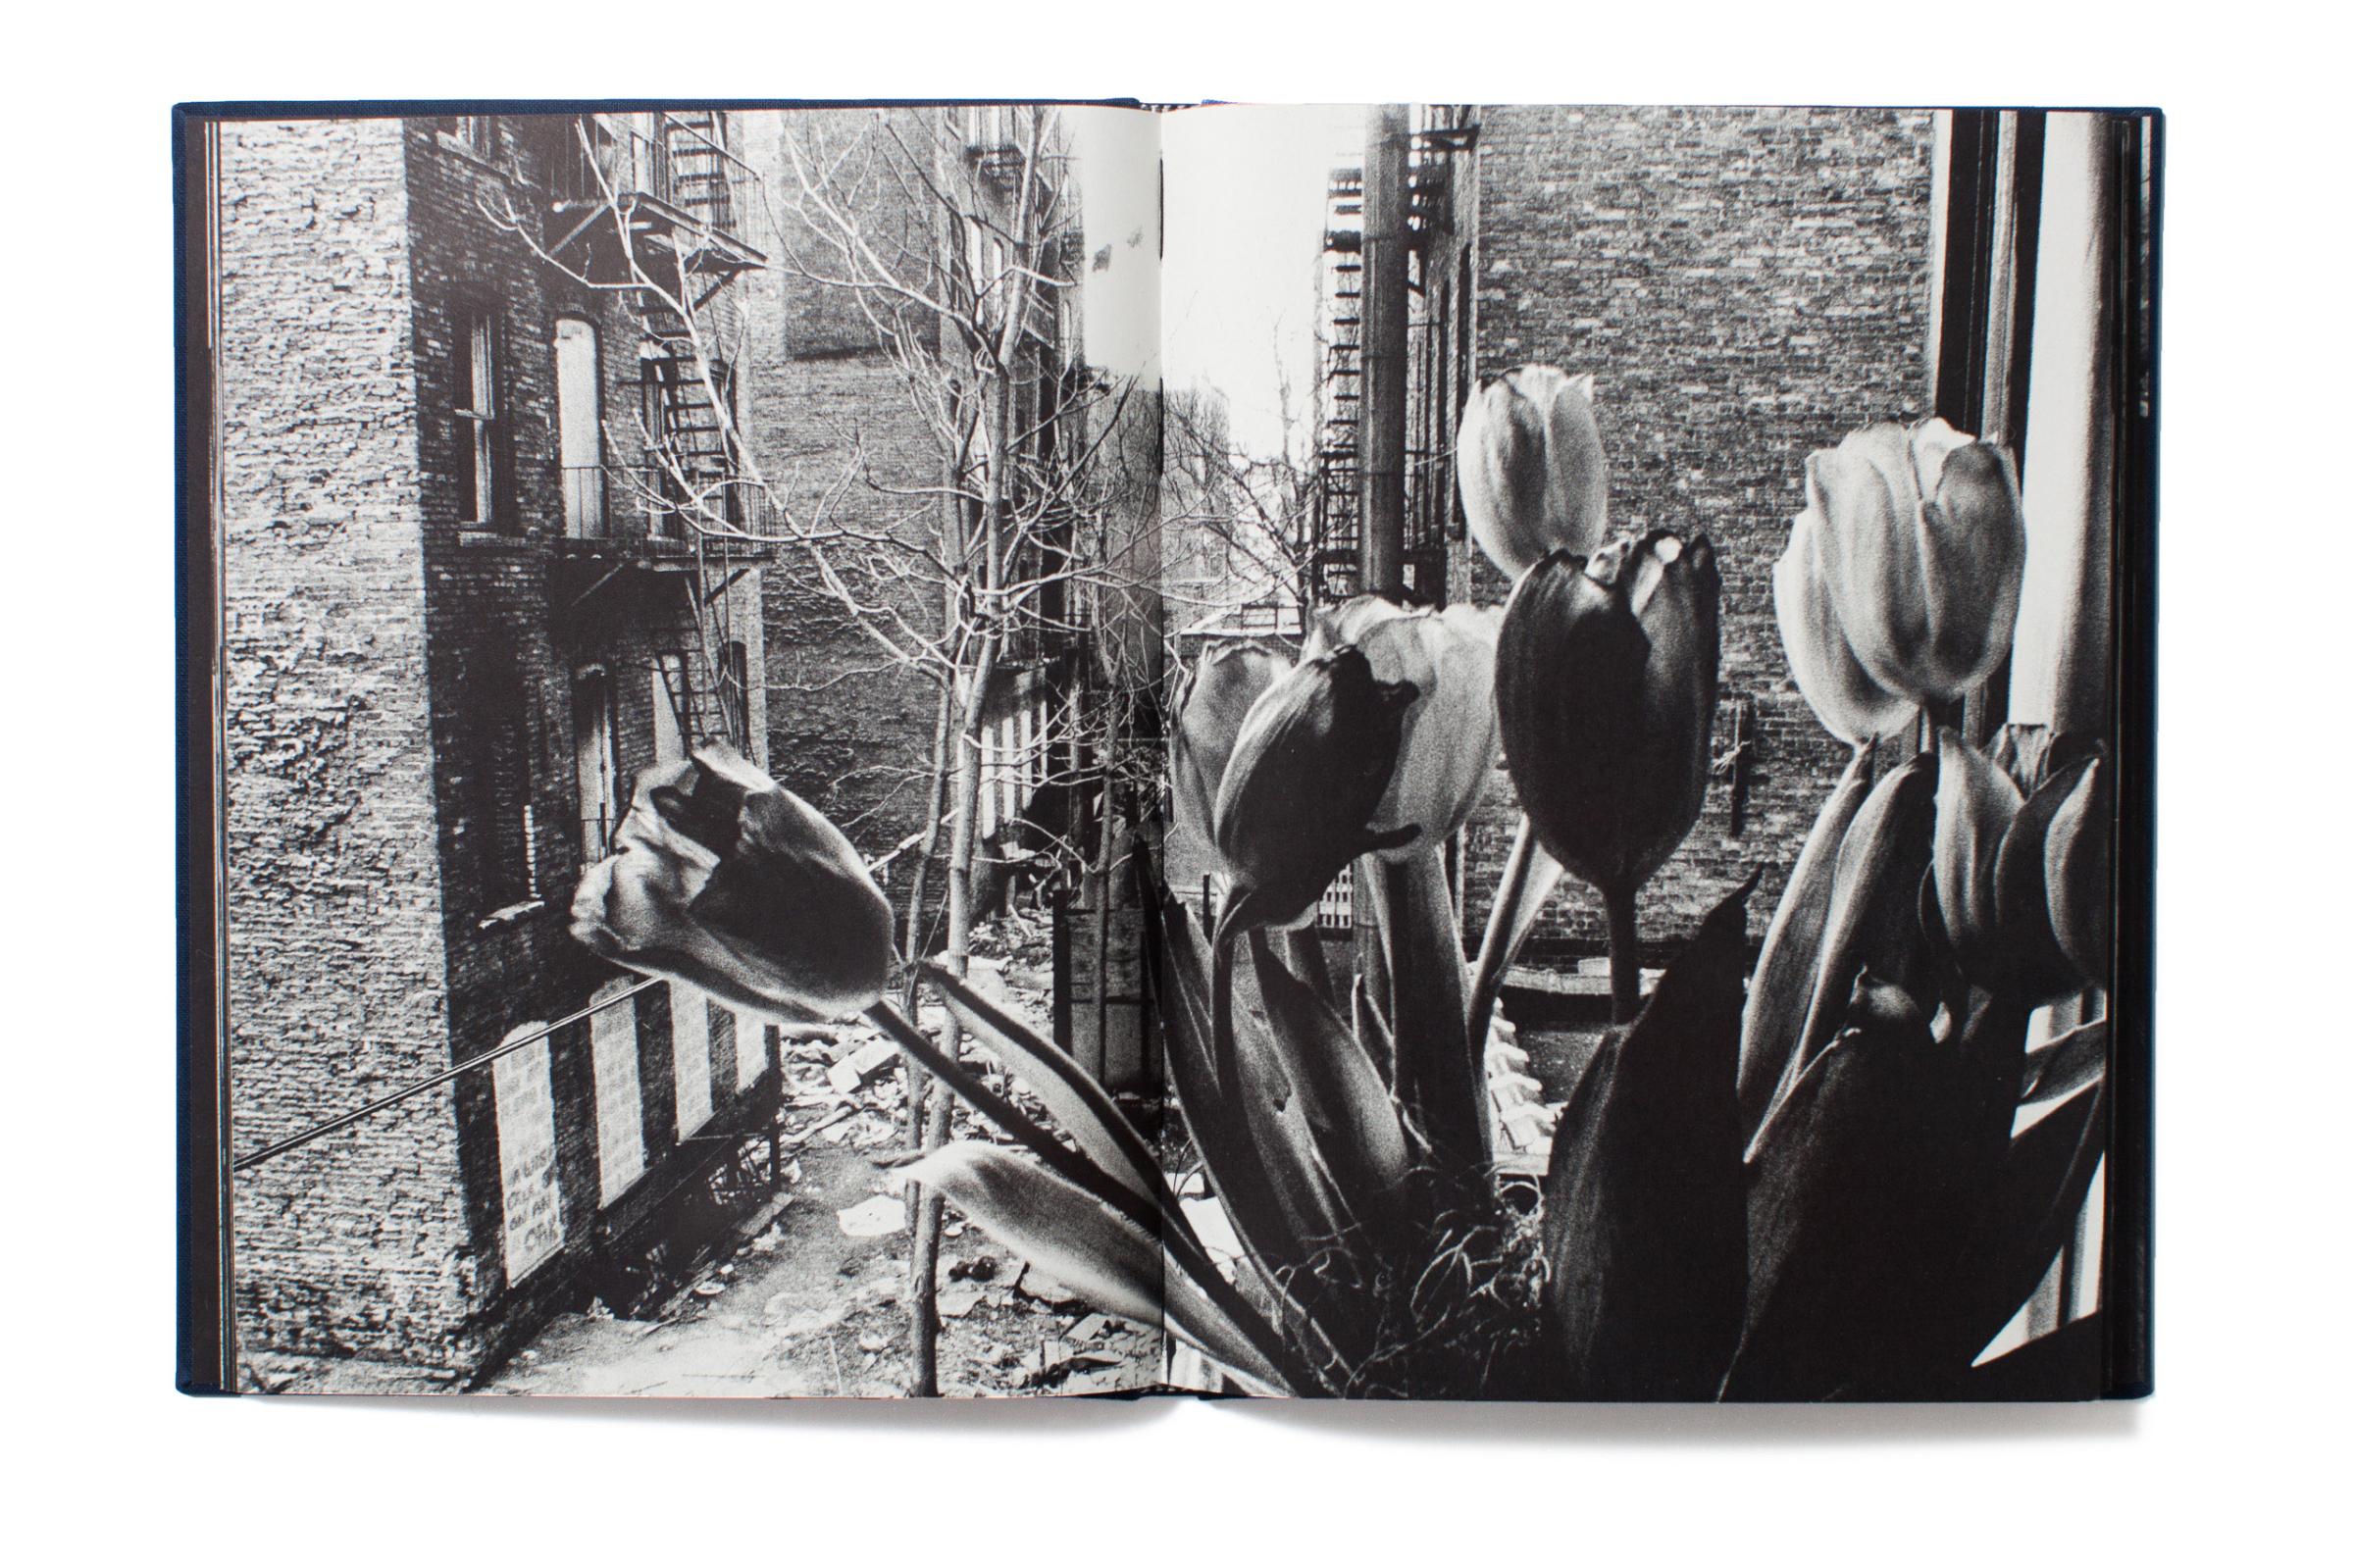 "The reissue of Invisible City is rich in texture and is every bit as intoxicating as that first visit to Schles’ East Village in New York City in the eighties. "-Michelle Molloy, International Photo Editor, TIME.